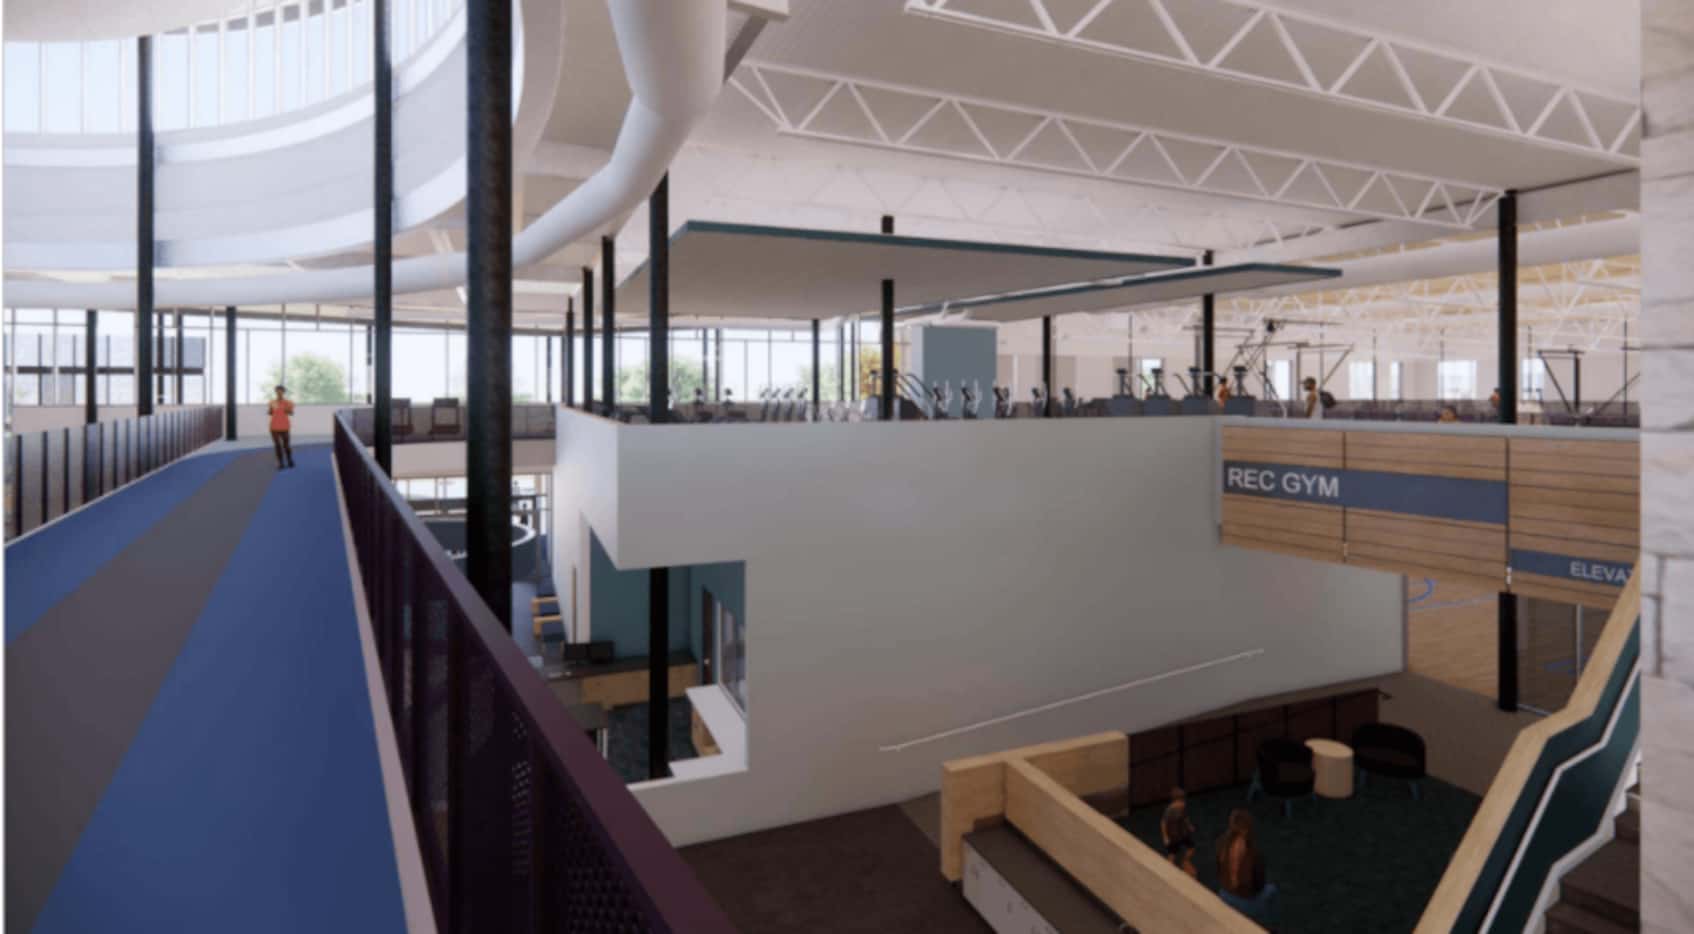 Renderings of the future Stephen G. Terrell Recreation Center in Allen, created by BRS...